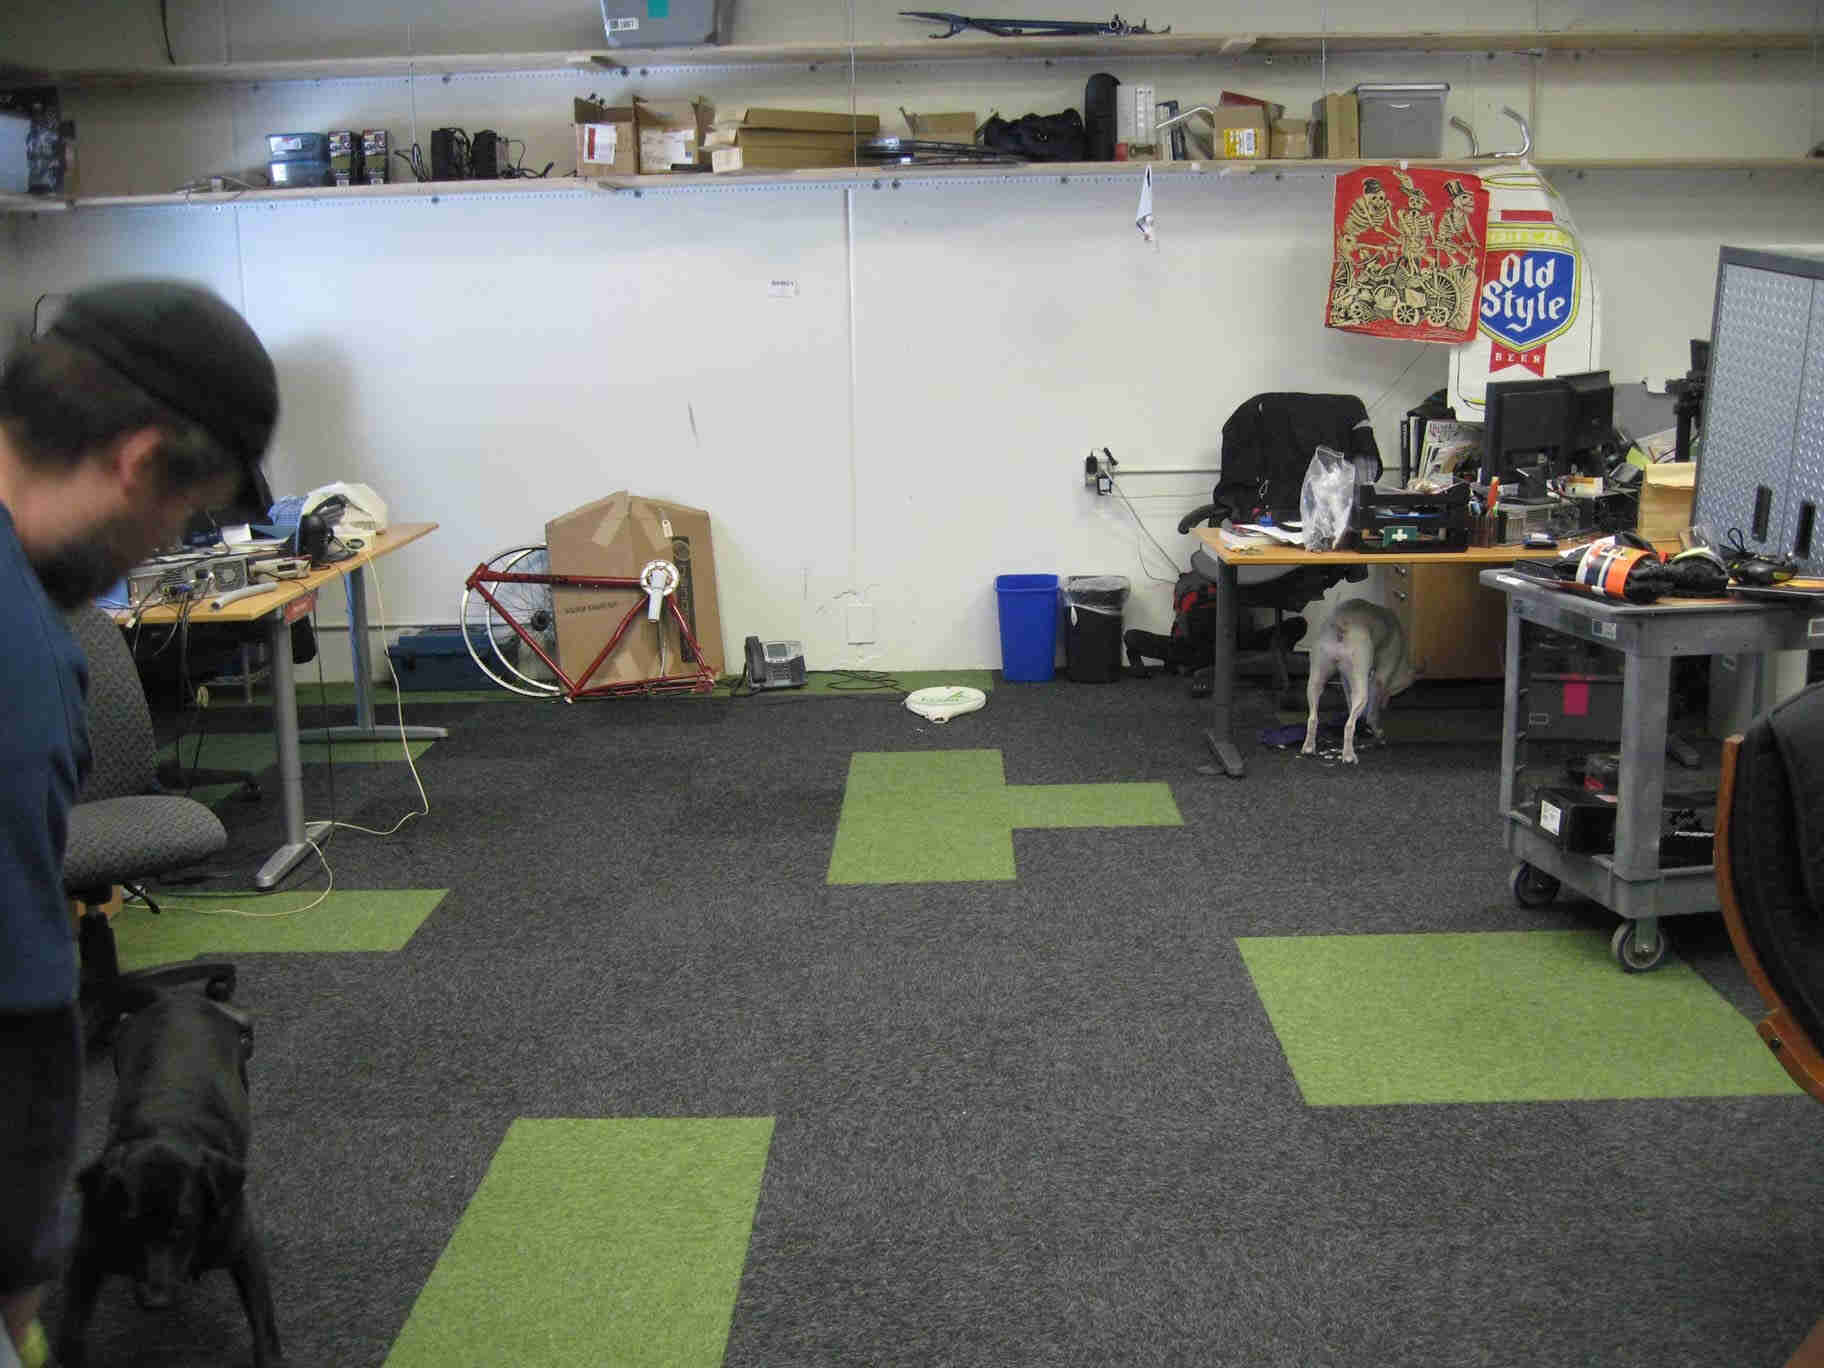 Right side, partial view of a person on the left, with a black dog below, in an office workspace